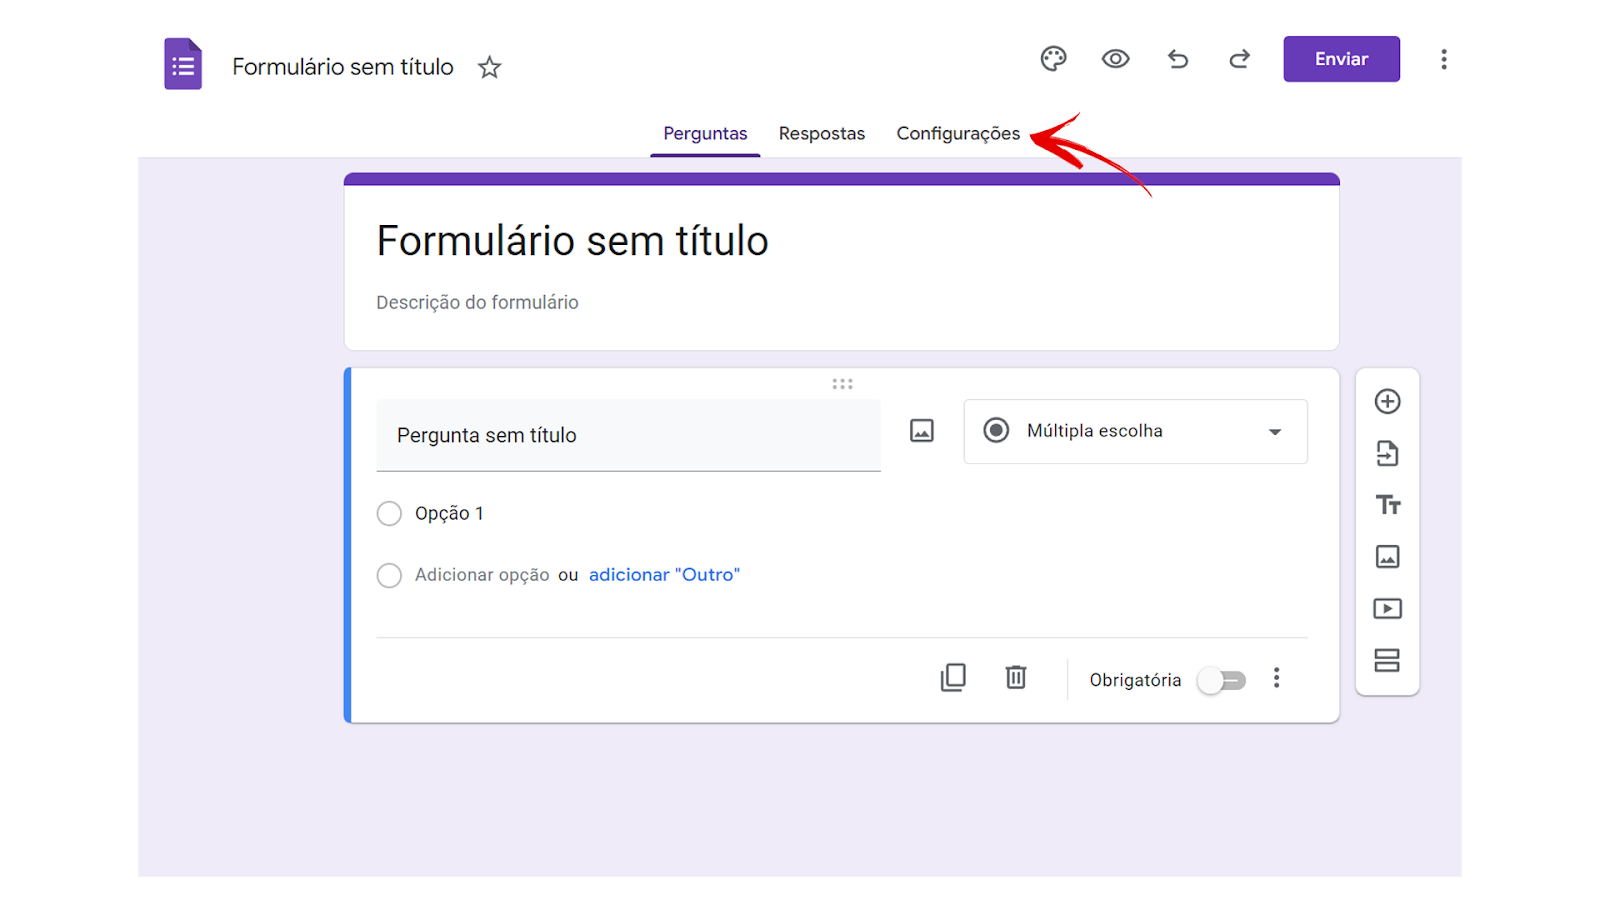 google-forms